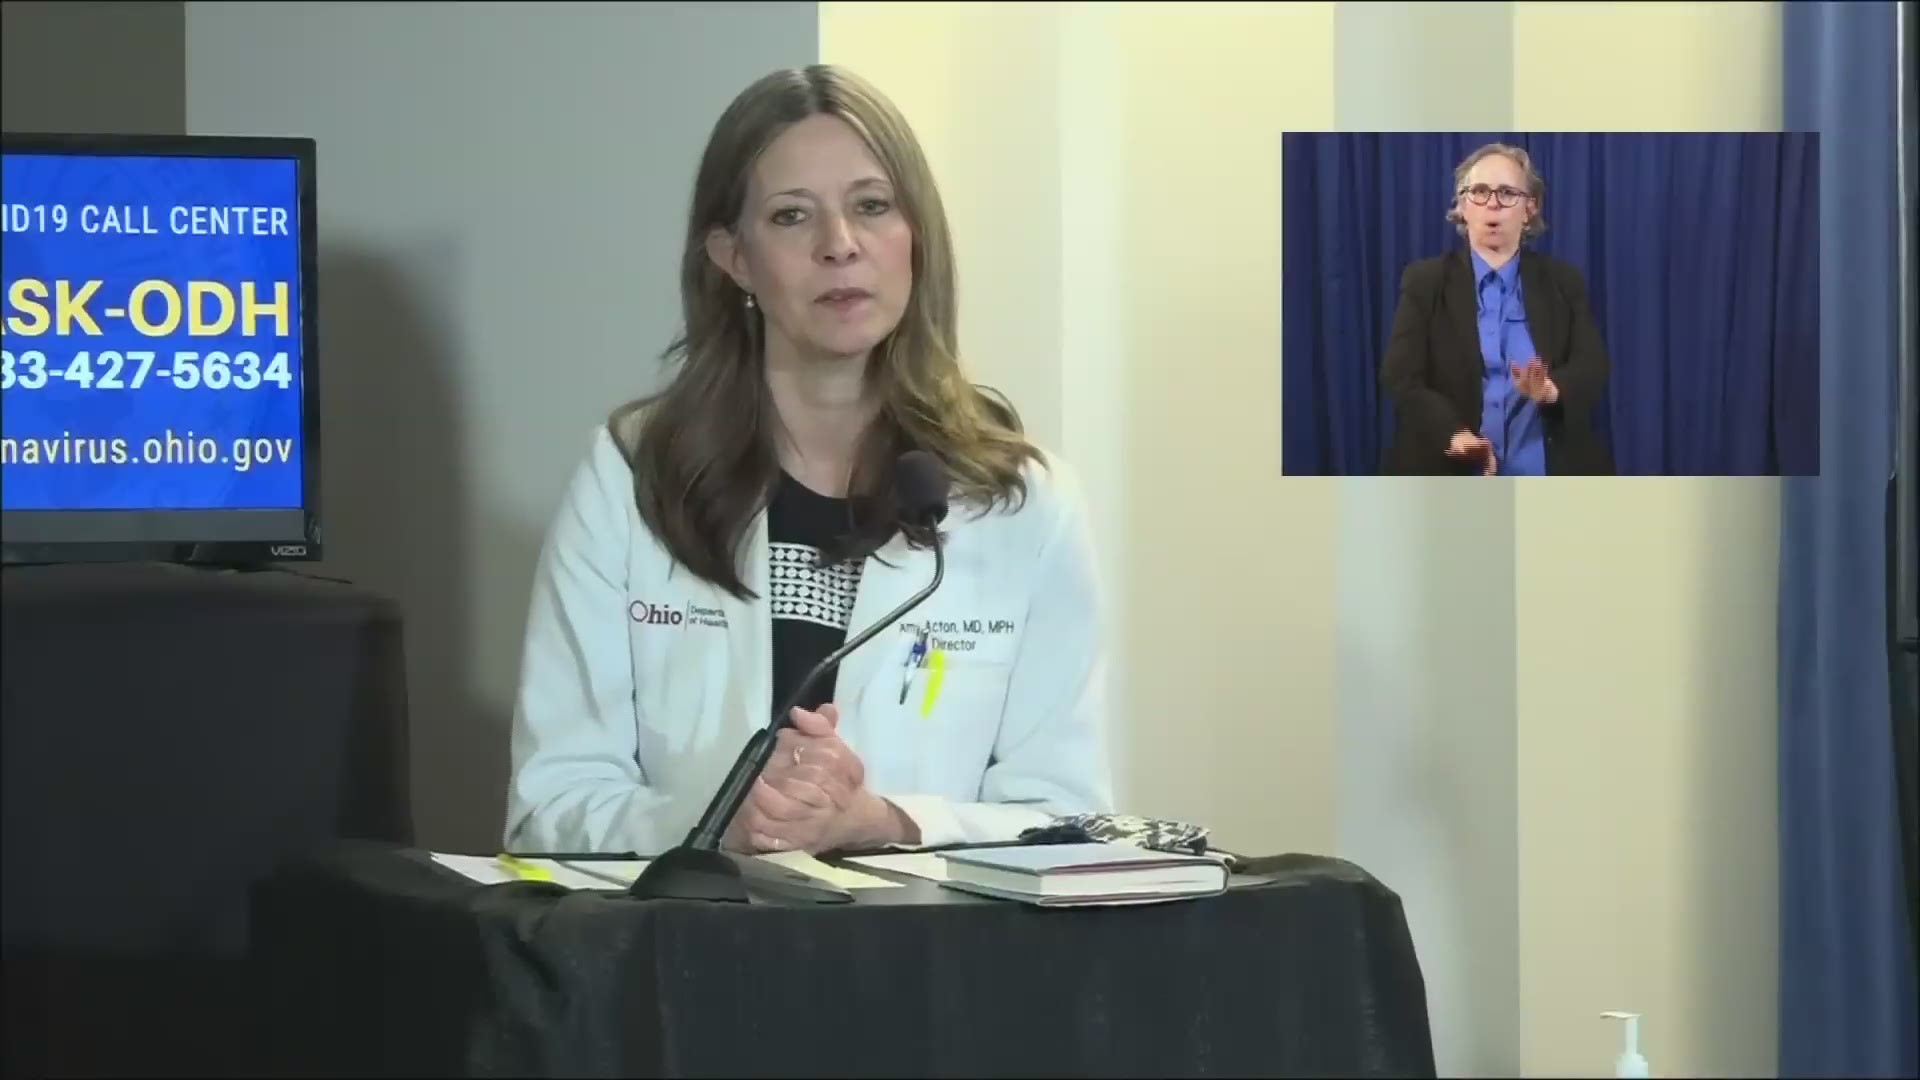 Ohio Governor Mike DeWine and Department of Health Director Dr. Amy Acton said that they expect coronavirus numbers to increase when the state's economy reopens.